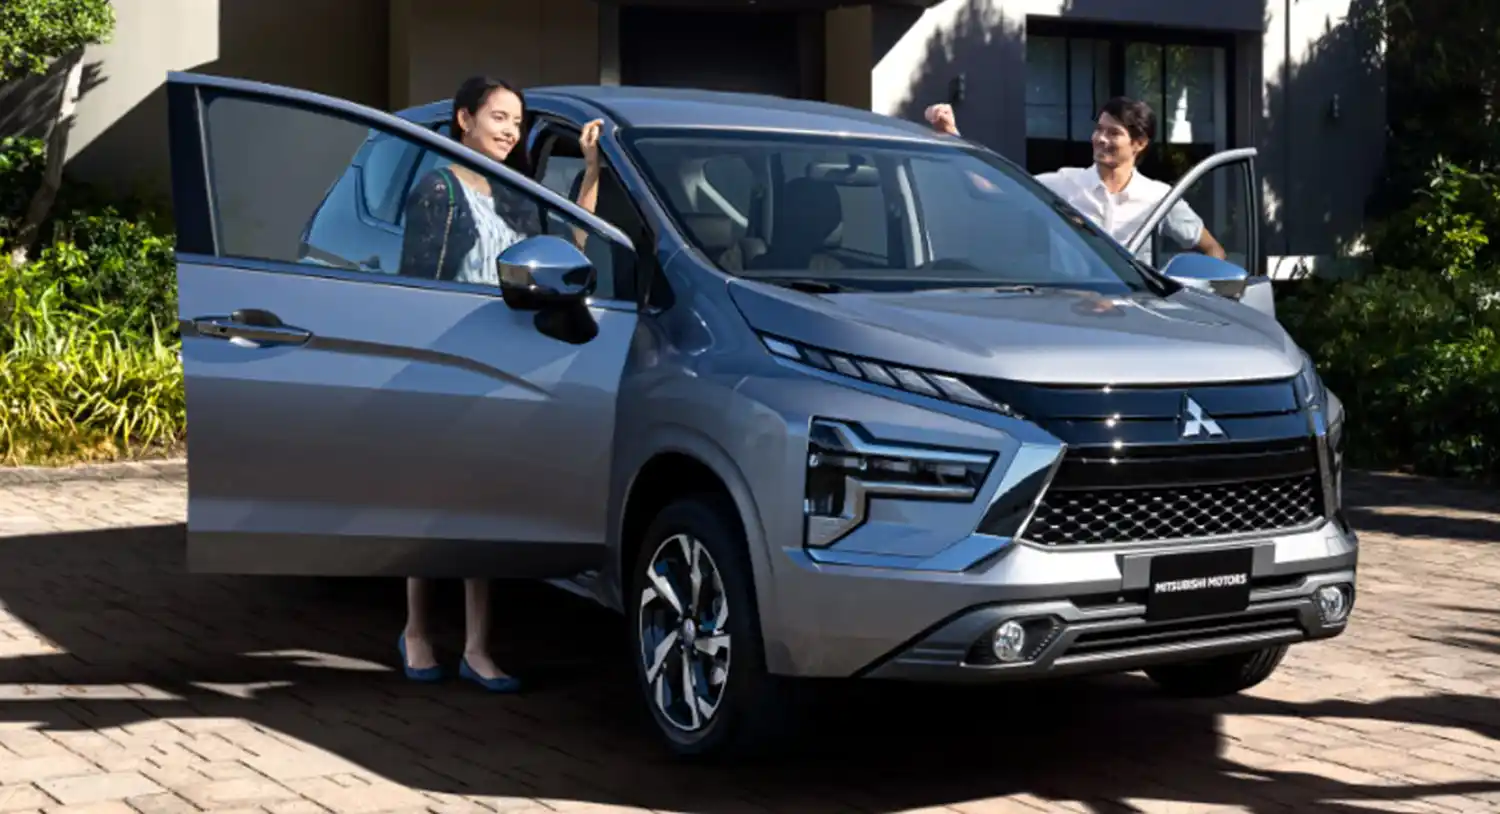 Mitsubishi Xpander (2022) – Evolved Into A Crossover MPV With Enhanced SUV Styling And Eco-Friendliness